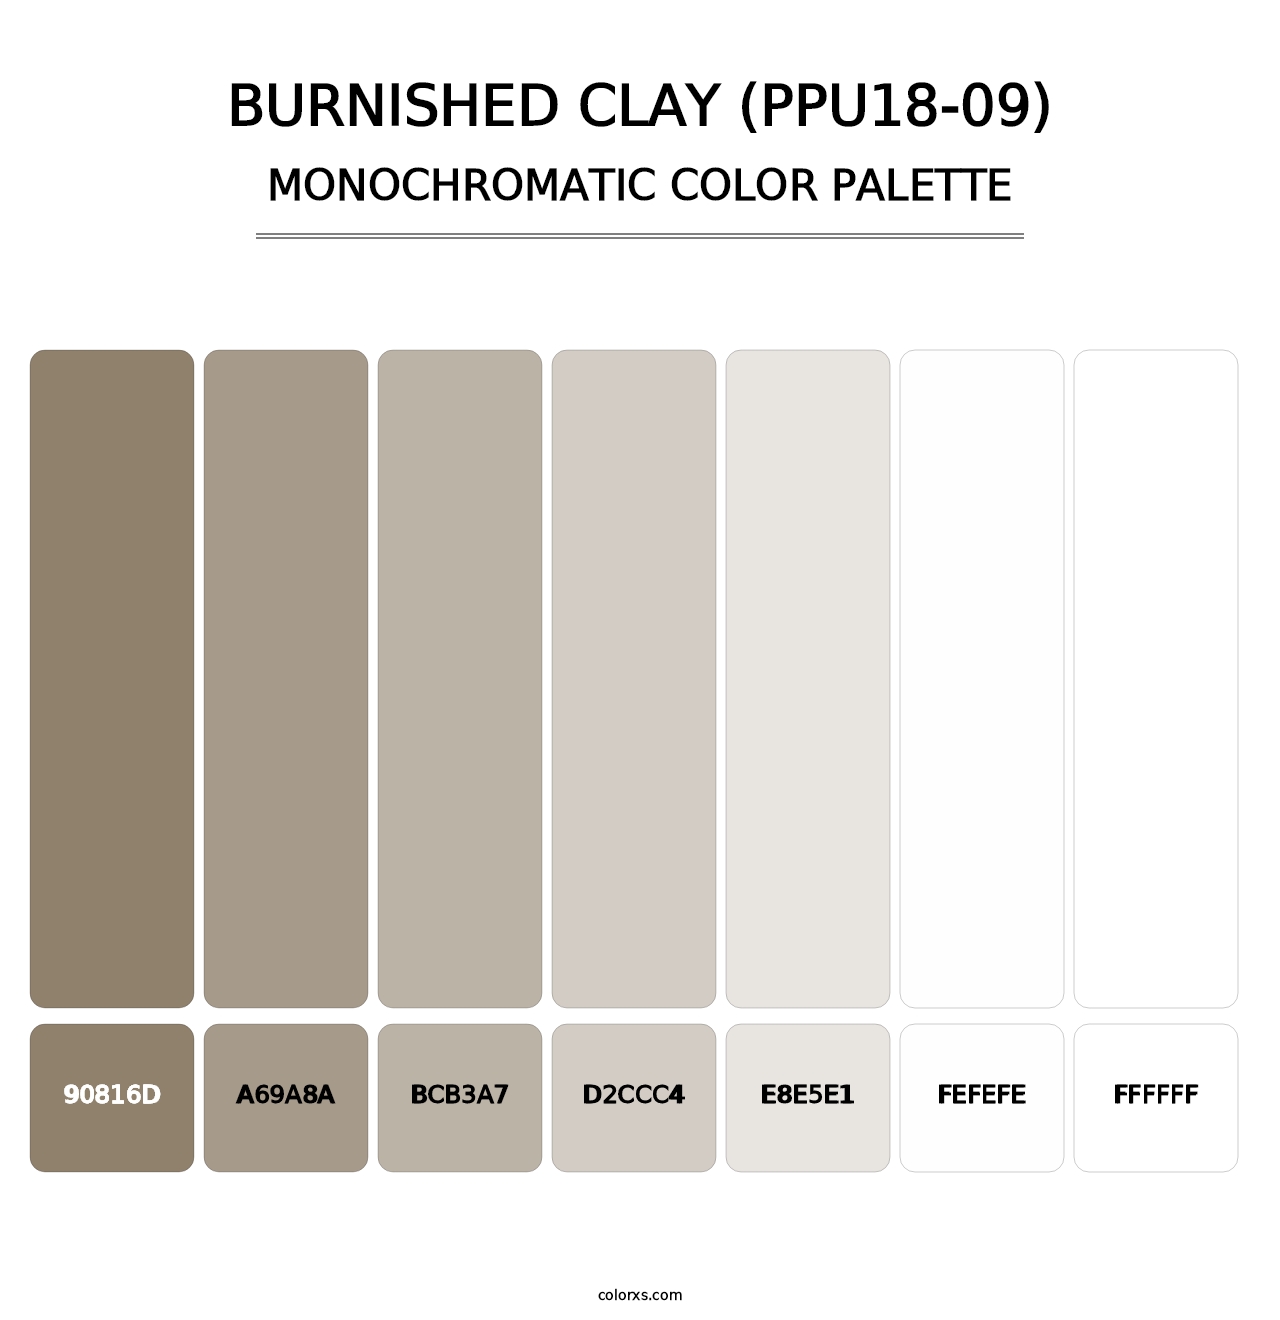 Burnished Clay (PPU18-09) - Monochromatic Color Palette